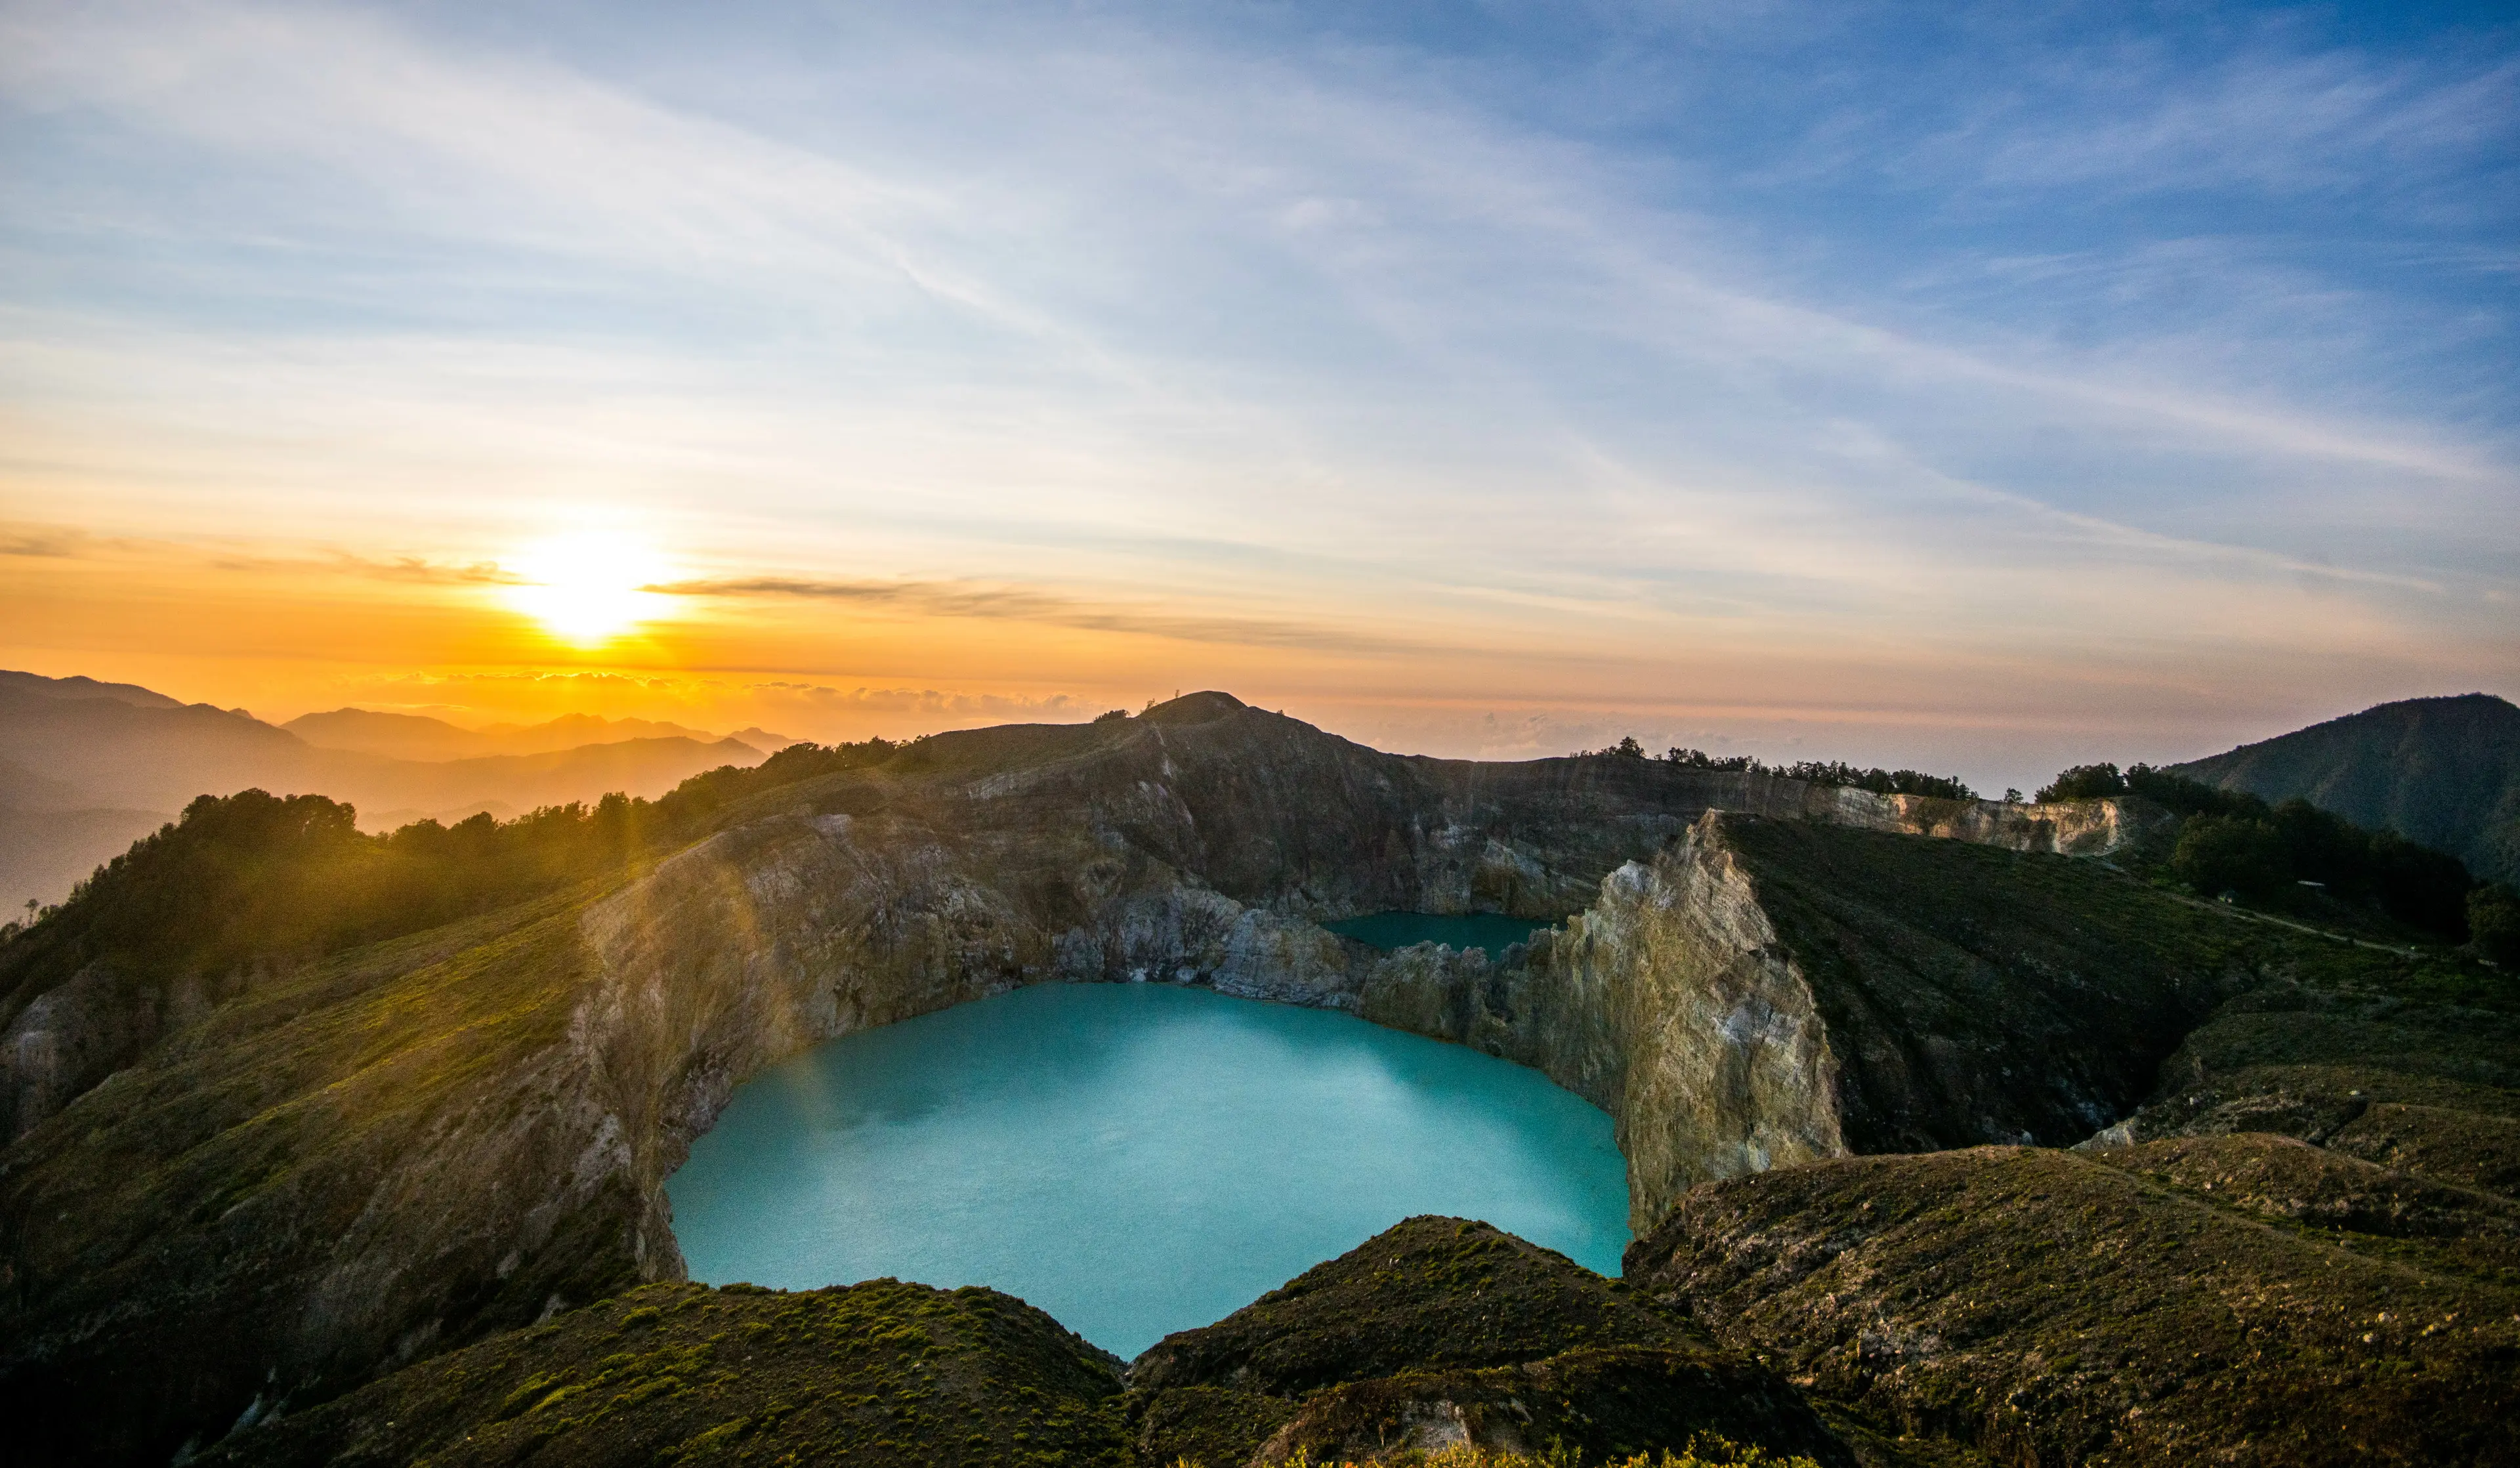 4-Day Food, Wine and Sightseeing Adventure in Flores, Indonesia